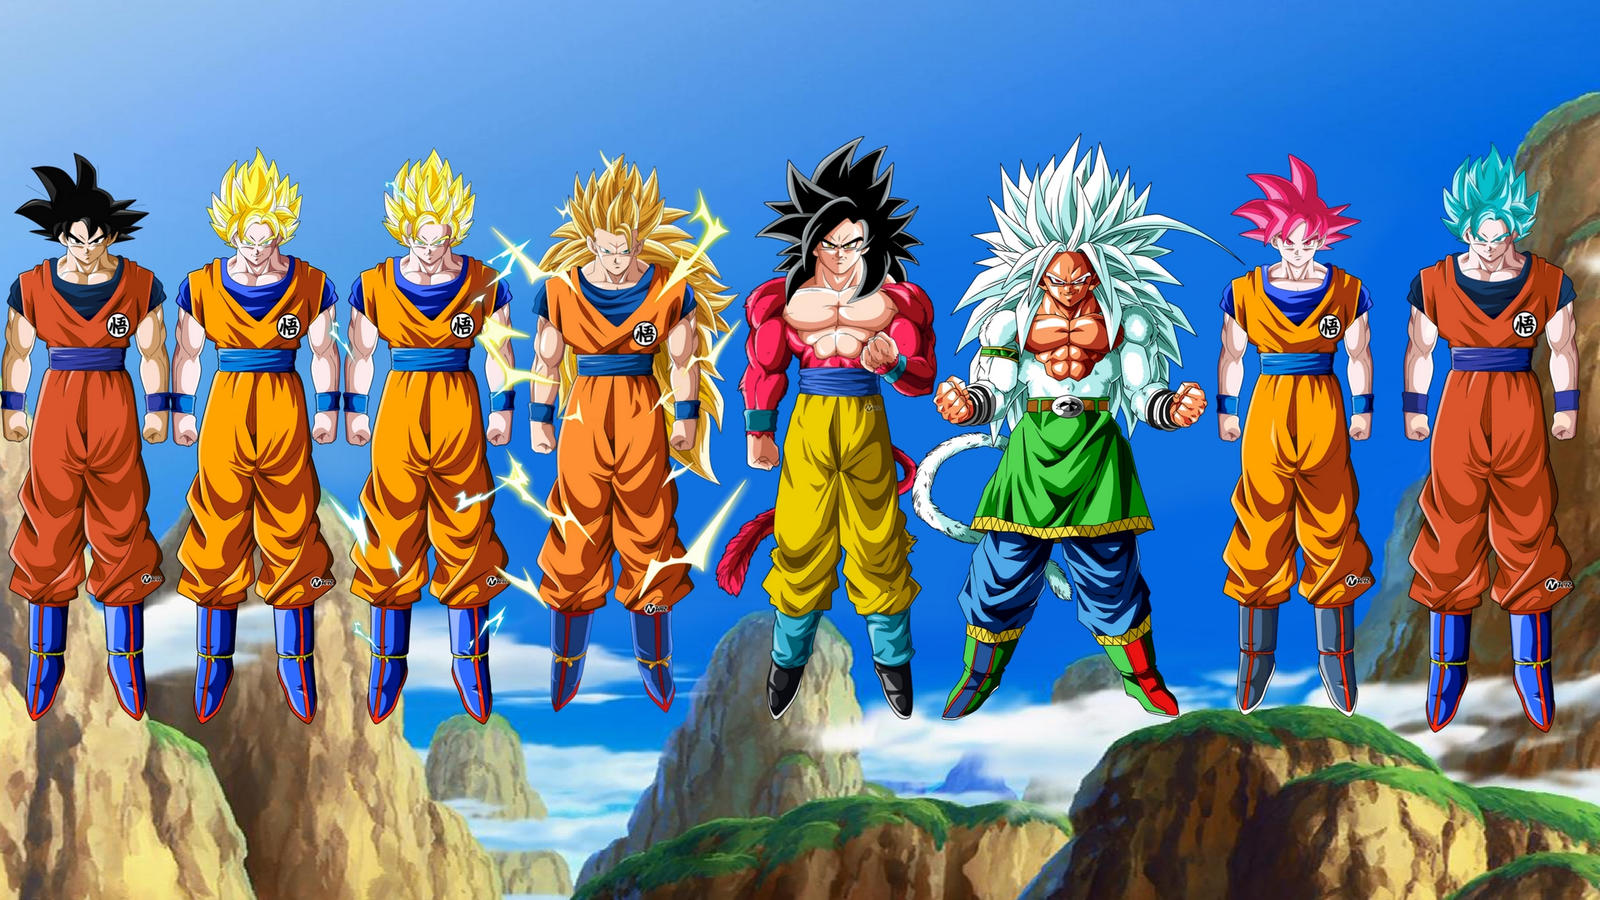 Goku all forms by MichaelD8489 on DeviantArt